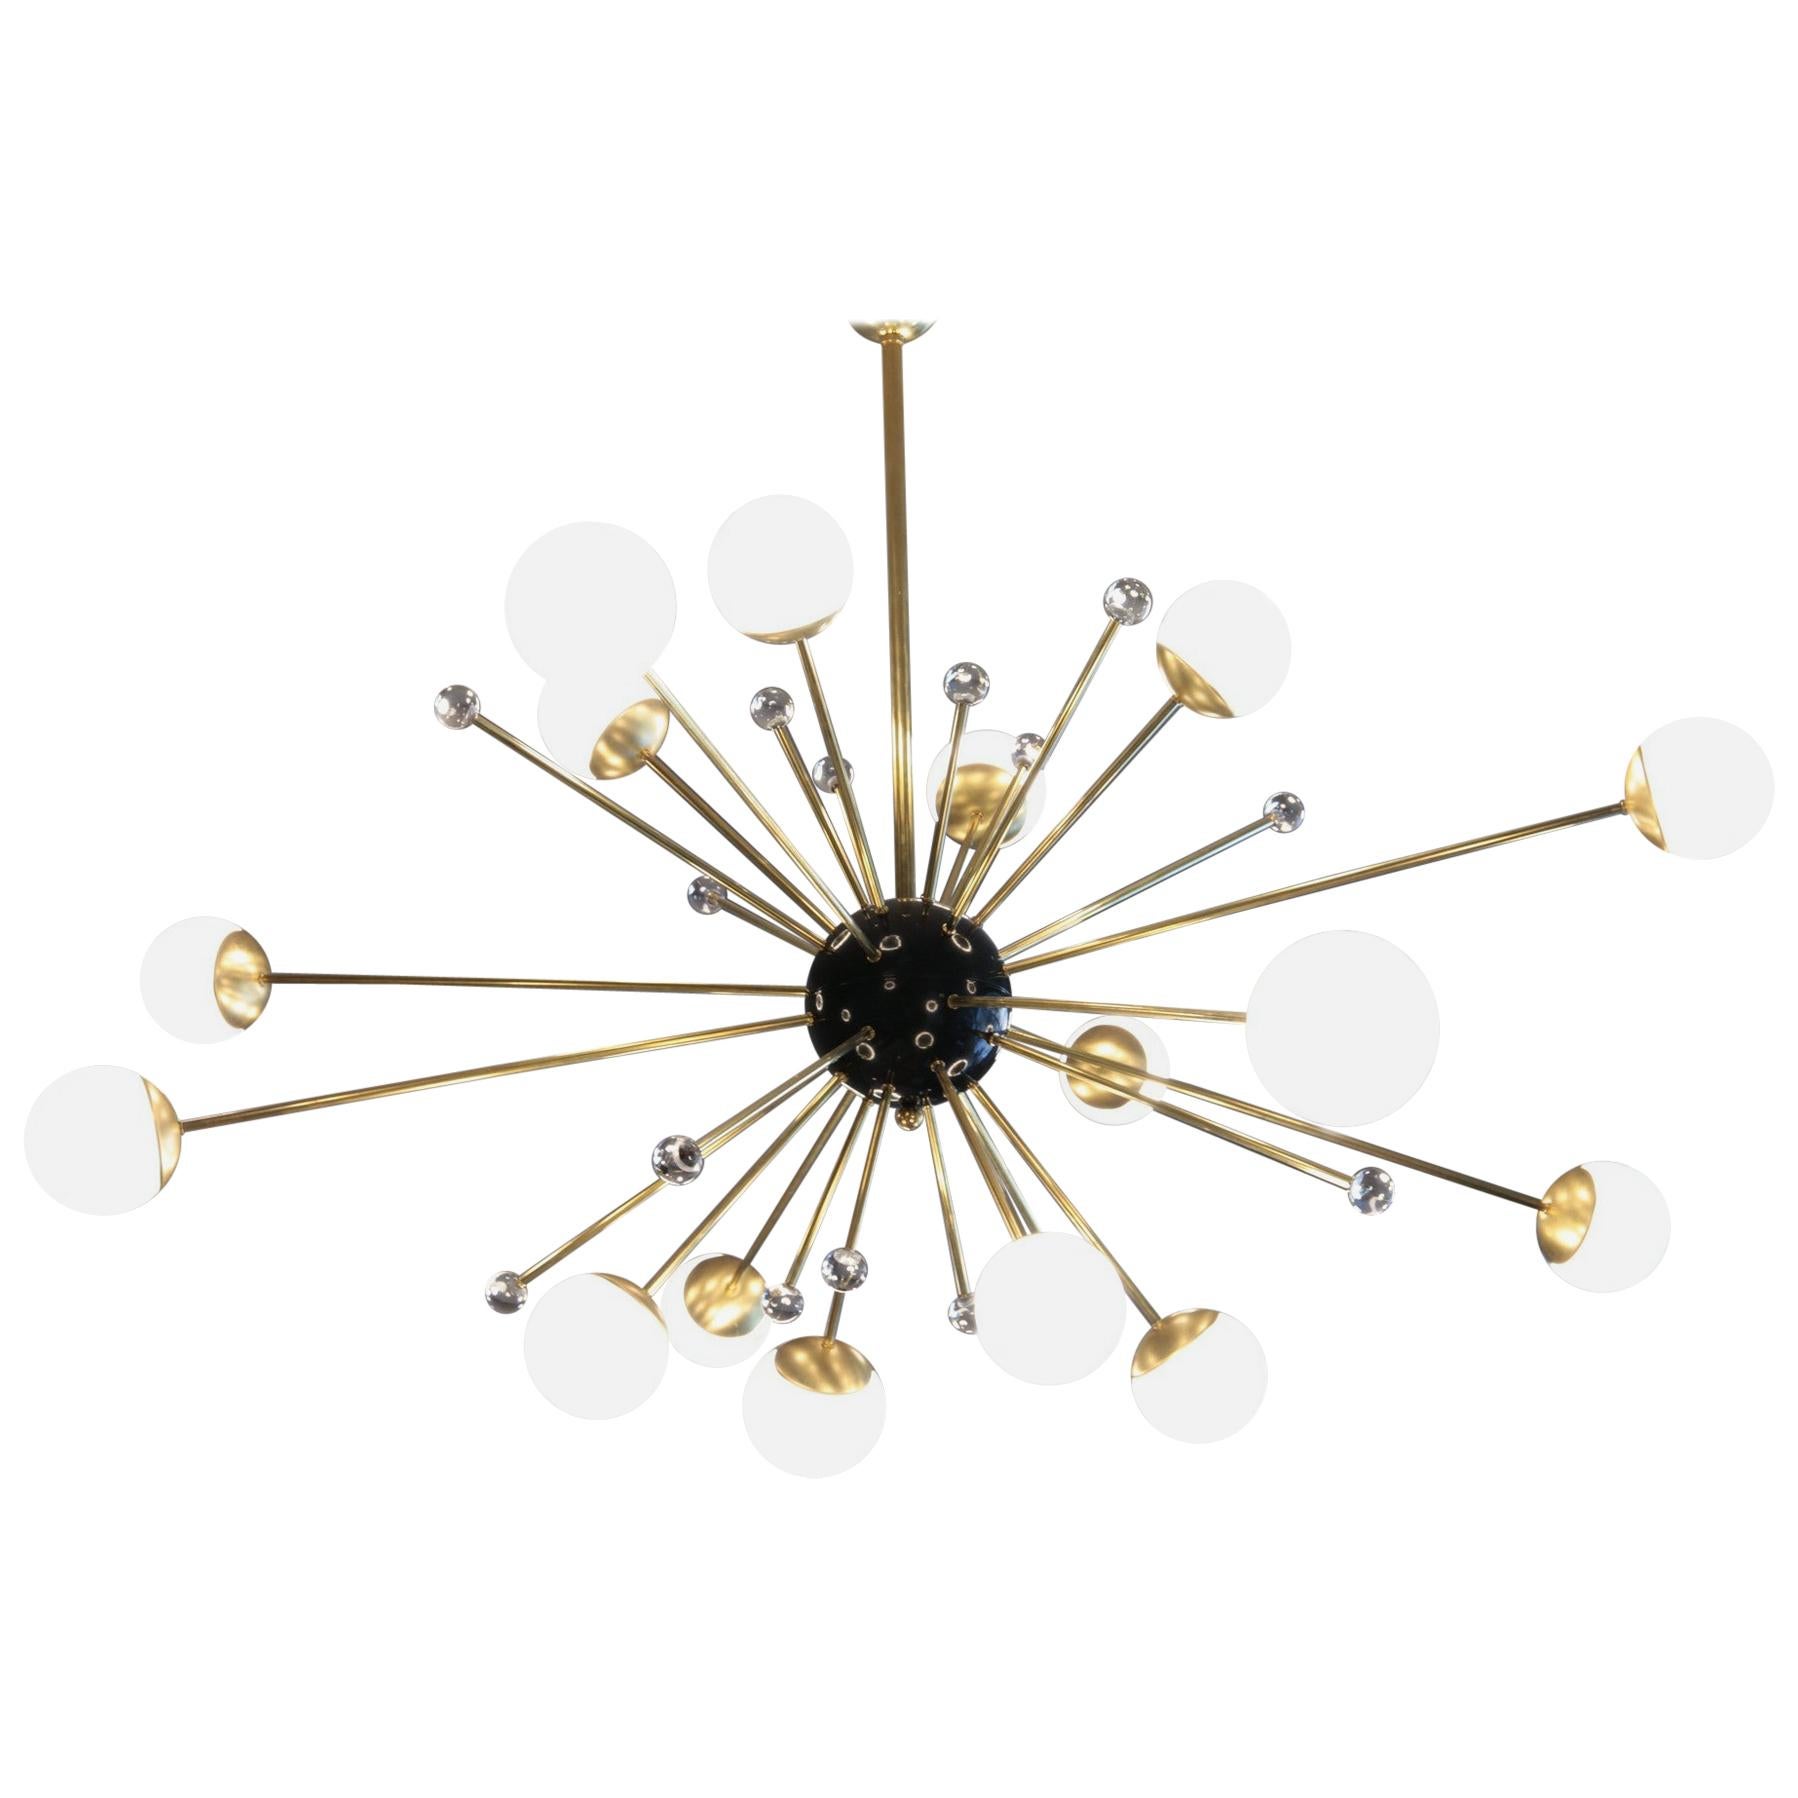 Brass and Lattimo Sputnik Chandelier 16 Lights and Clear Orbs Playing with Light